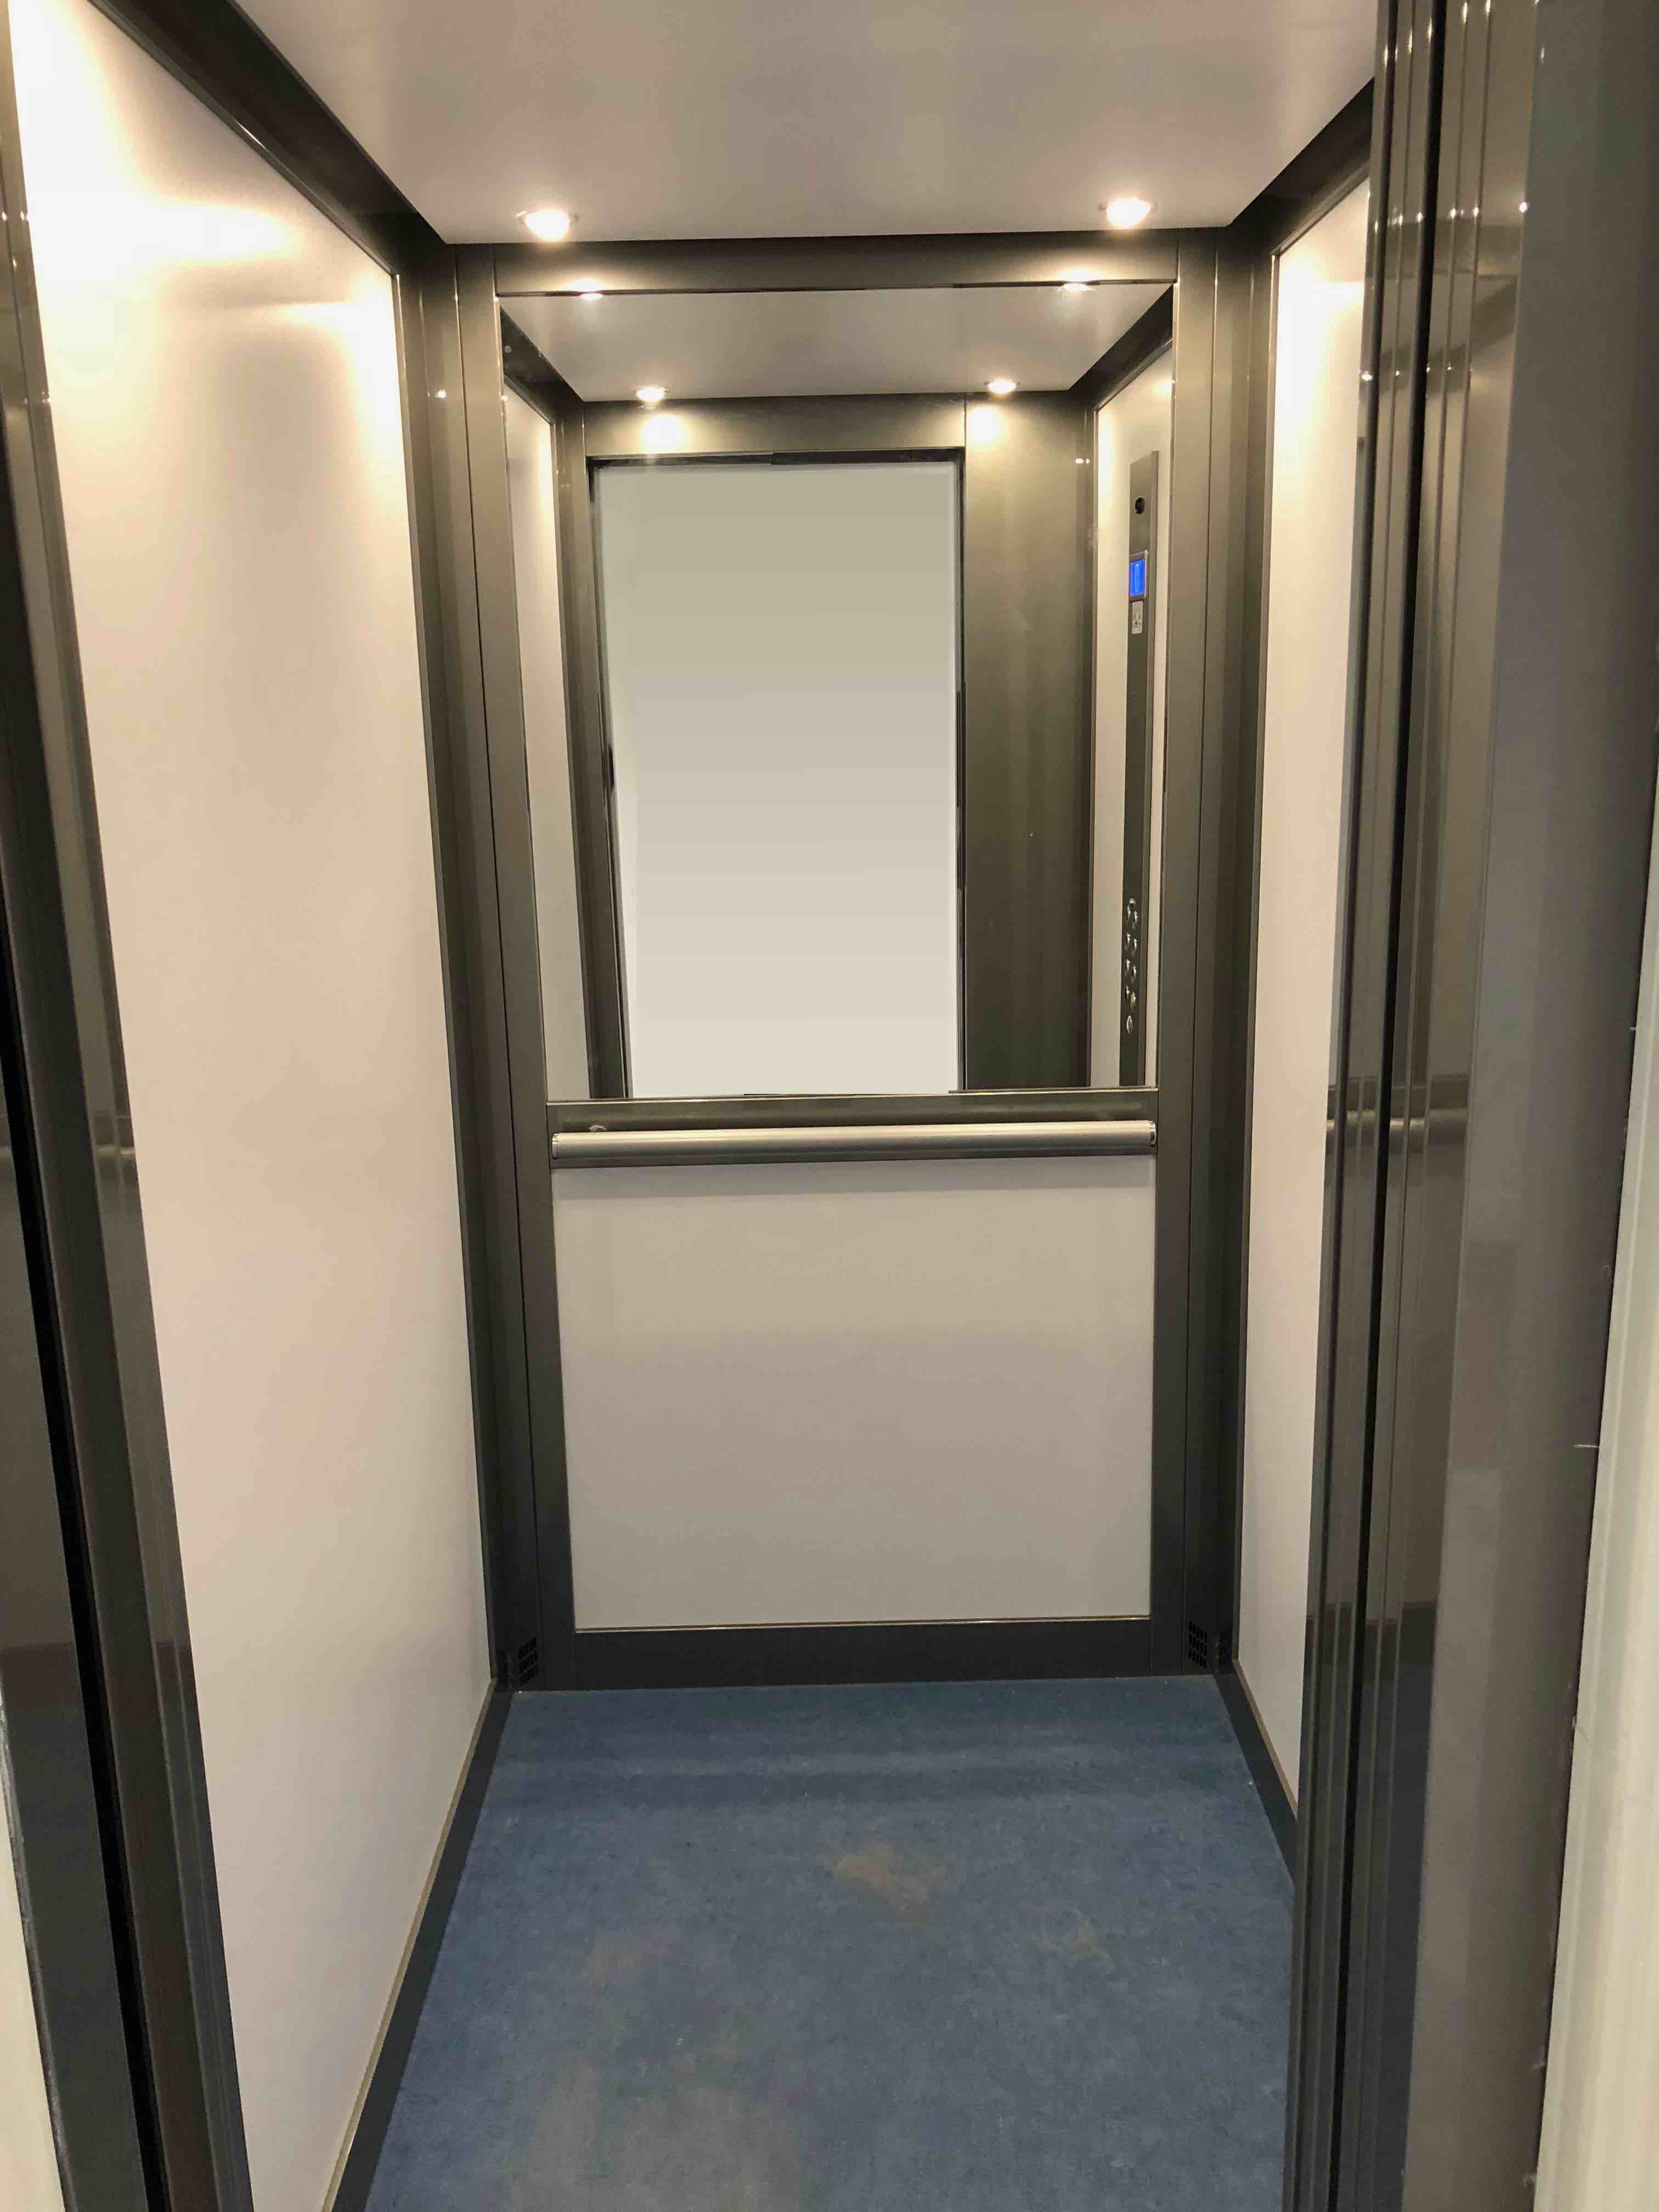 Lift in Flats in Reading